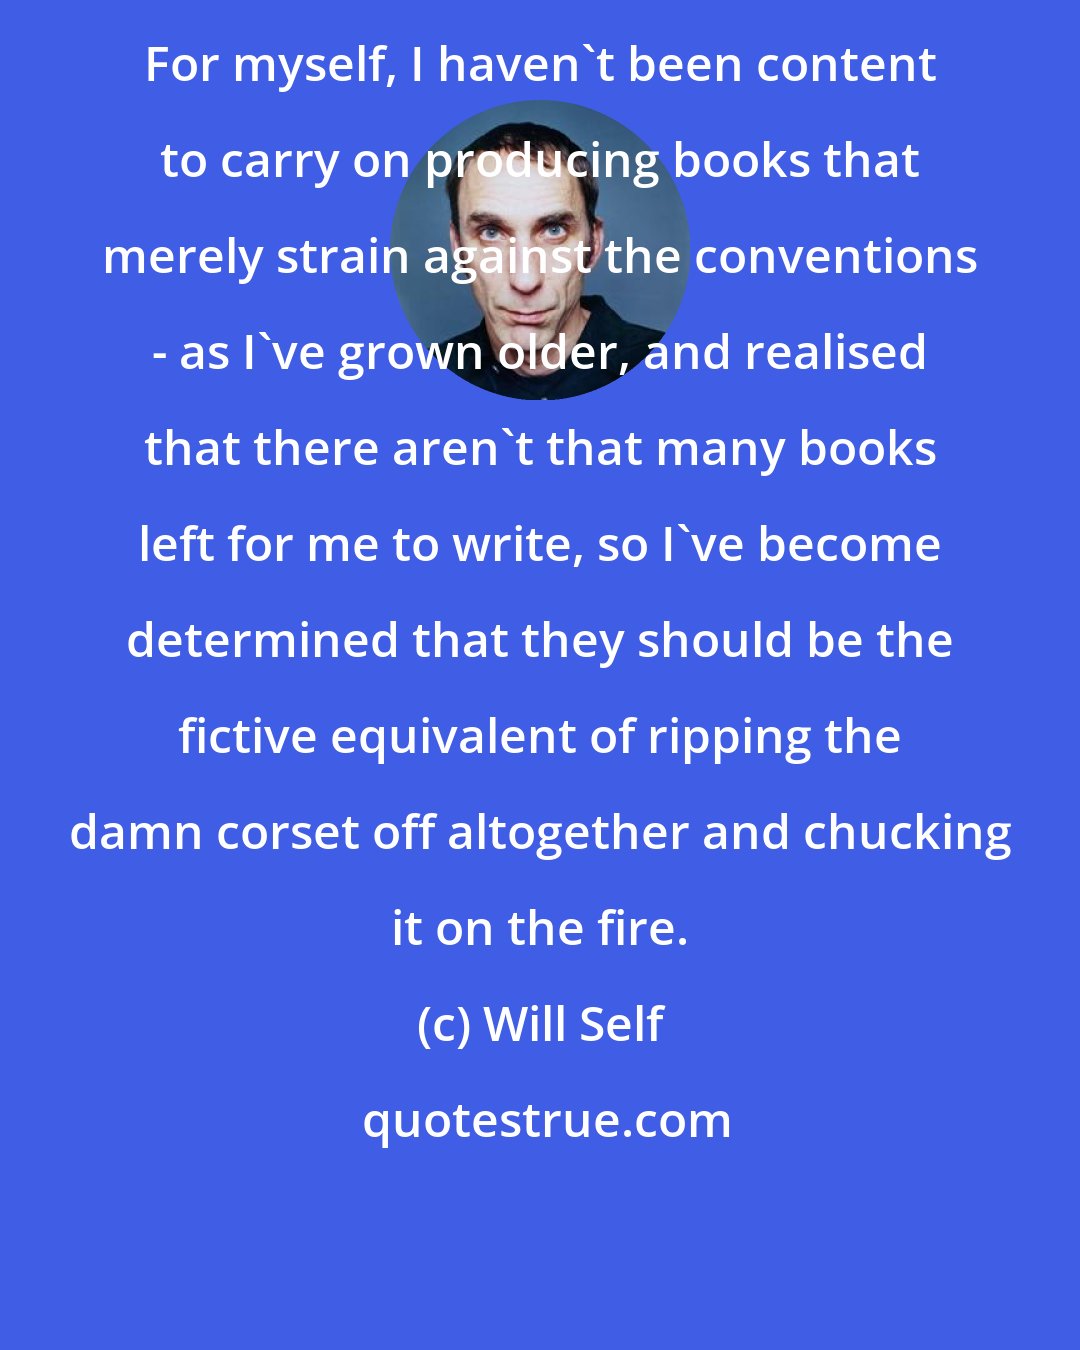 Will Self: For myself, I haven't been content to carry on producing books that merely strain against the conventions - as I've grown older, and realised that there aren't that many books left for me to write, so I've become determined that they should be the fictive equivalent of ripping the damn corset off altogether and chucking it on the fire.